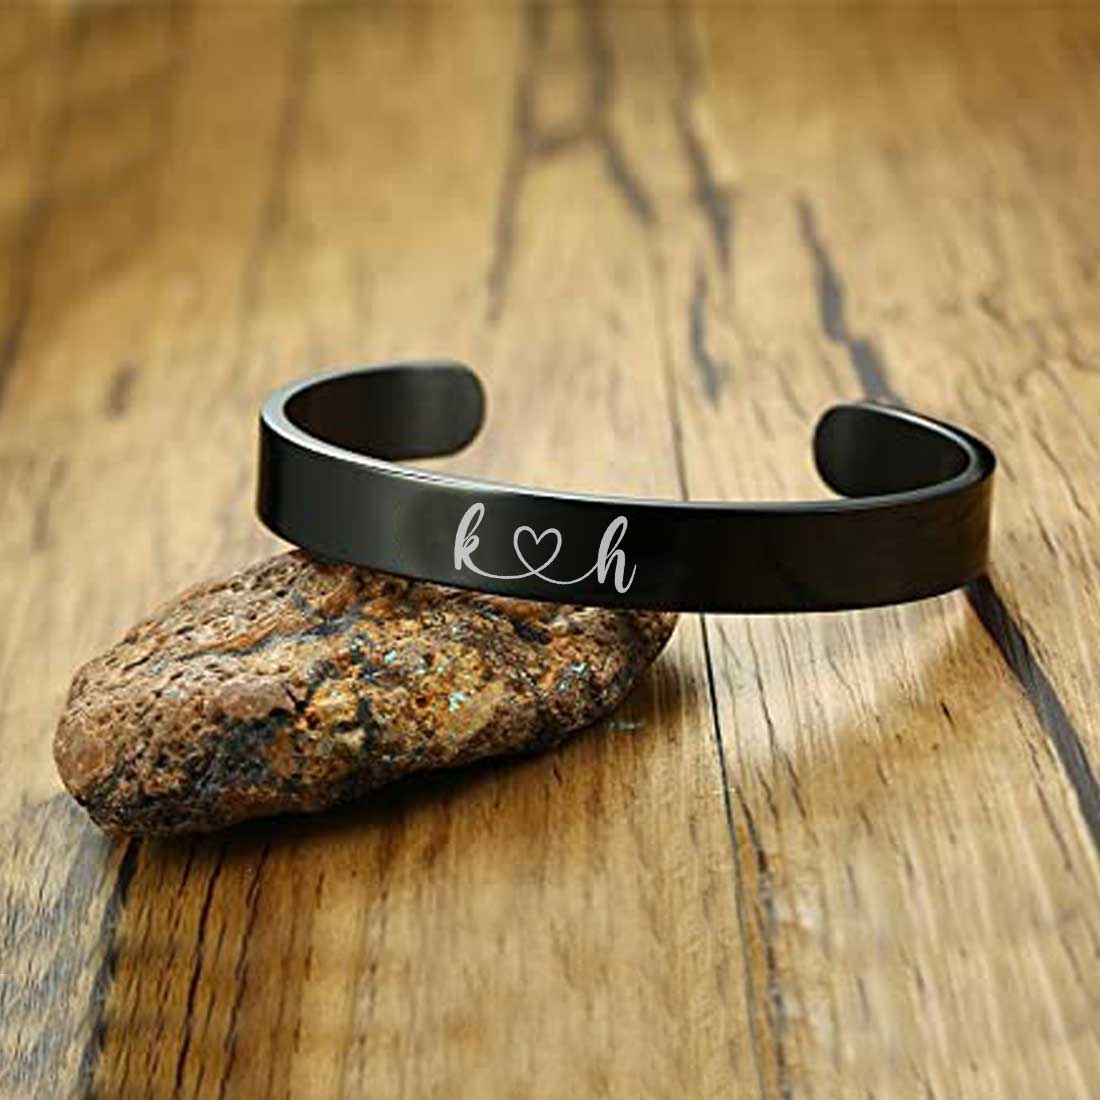 morniface Magnetic Personalized Couple Bracelets， Mutual Attraction  Relationship Matching Friendship Rope Bracelet Gift for Women Men Boyfriend  Girlfriend, Metal, not known price in UAE | Amazon UAE | kanbkam